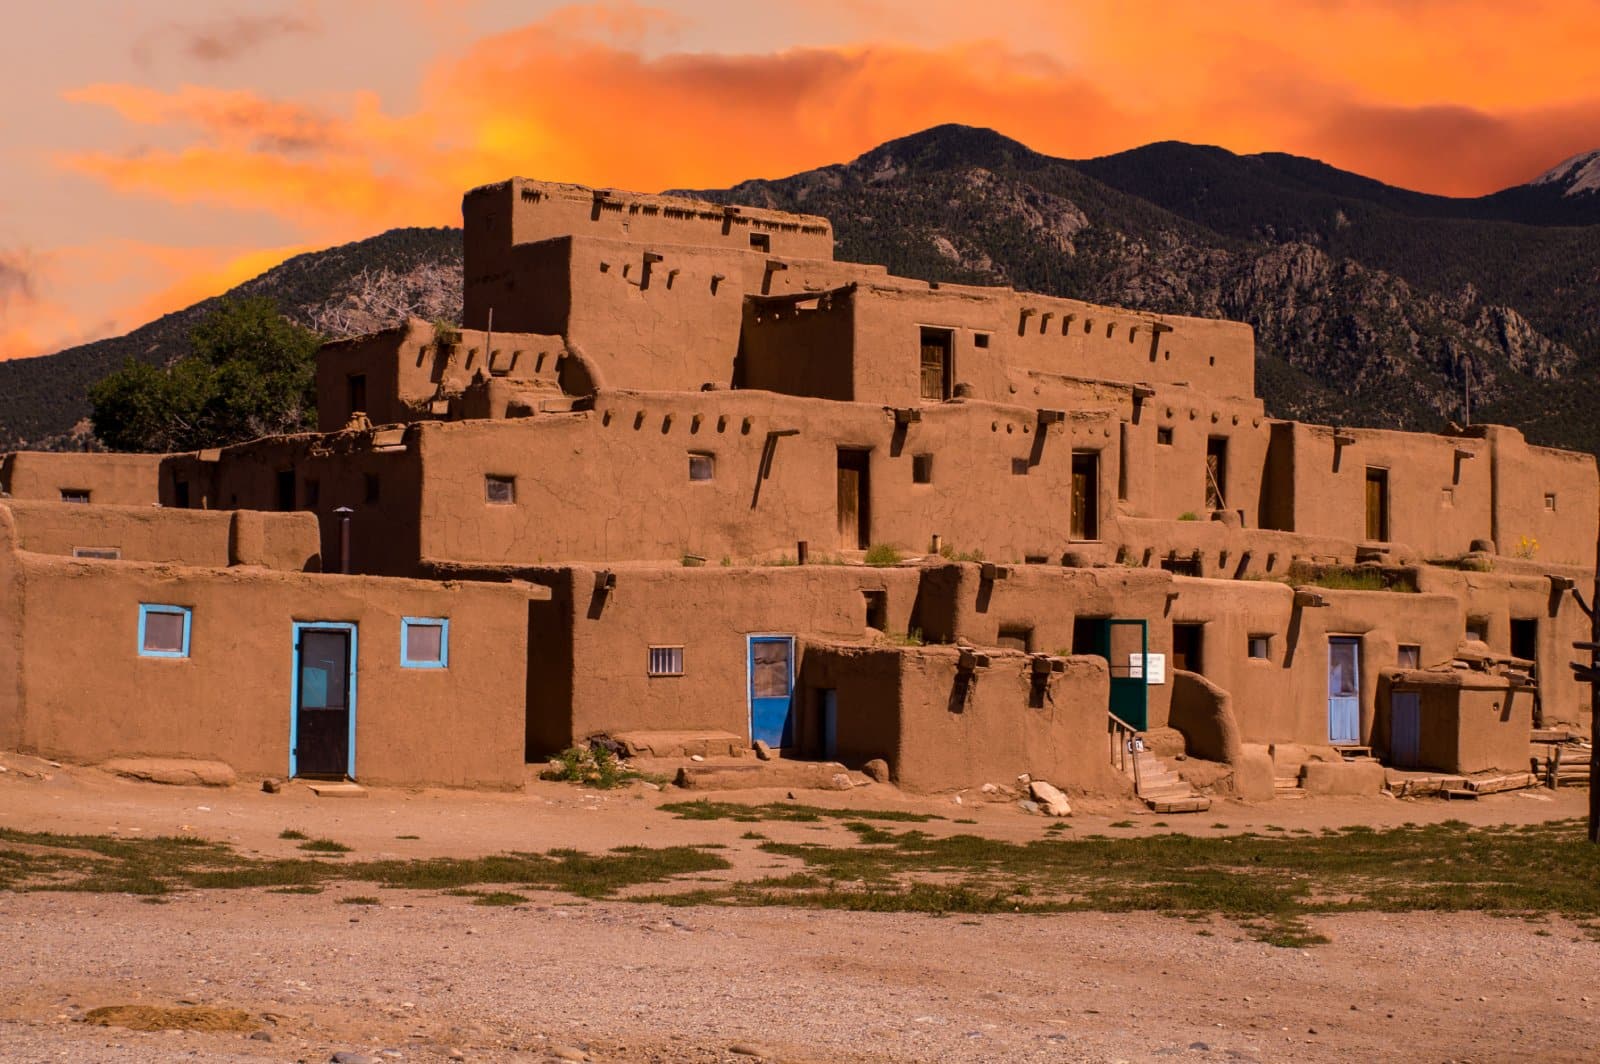 <p><span>Immerse yourself in the bohemian vibe of Taos, with its adobe casitas, eclectic art scene, and spiritual energy that echoes the landscapes of Tibet and India.</span></p>